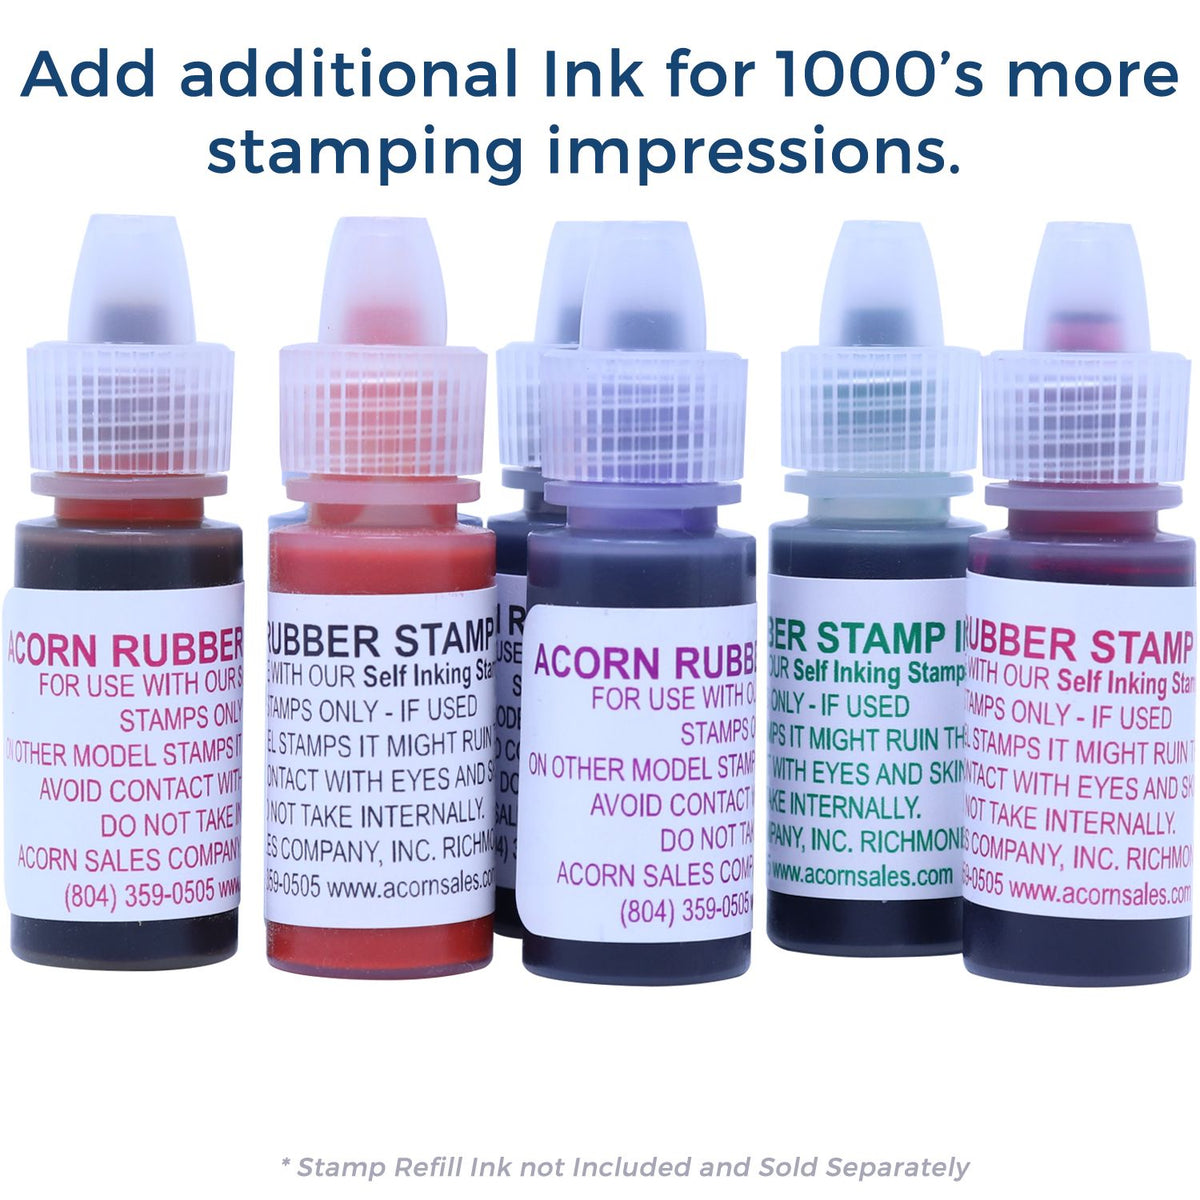 Refill Inks for Slim Pre-Inked Entered with Date Box Stamp Available